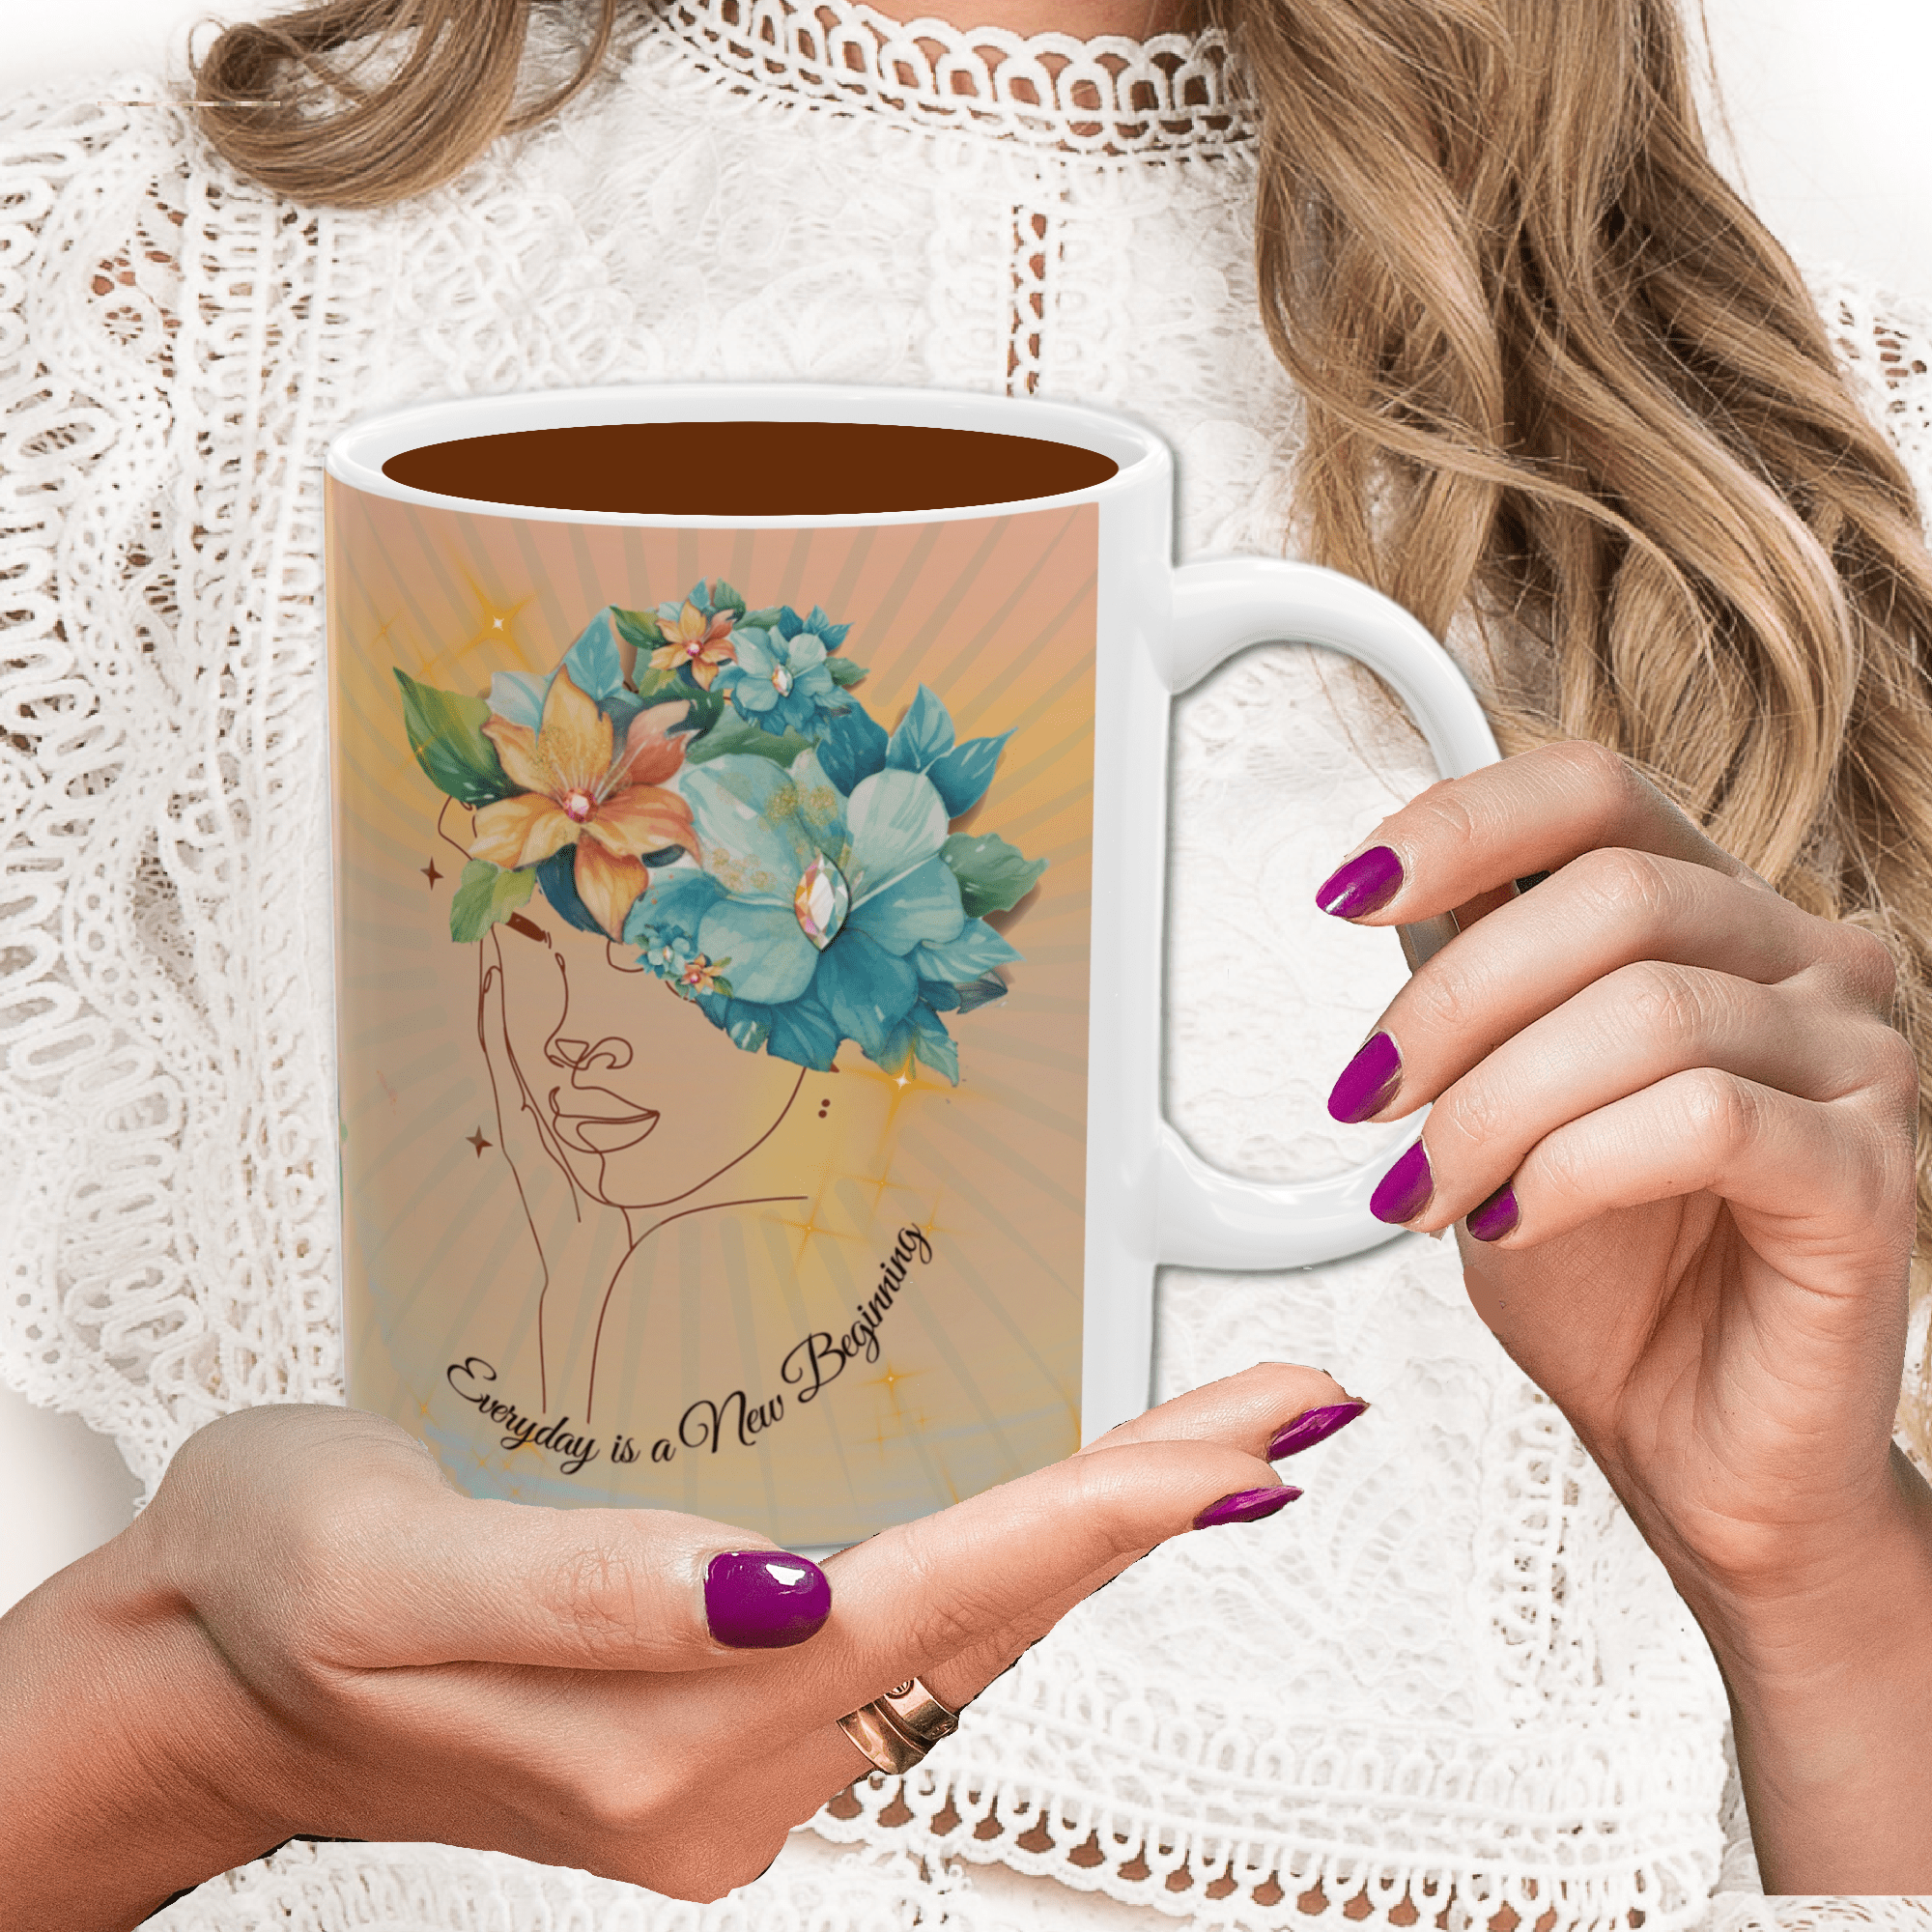 person holding a ceramic mug with inspirational saying "everyday is a new beginning"